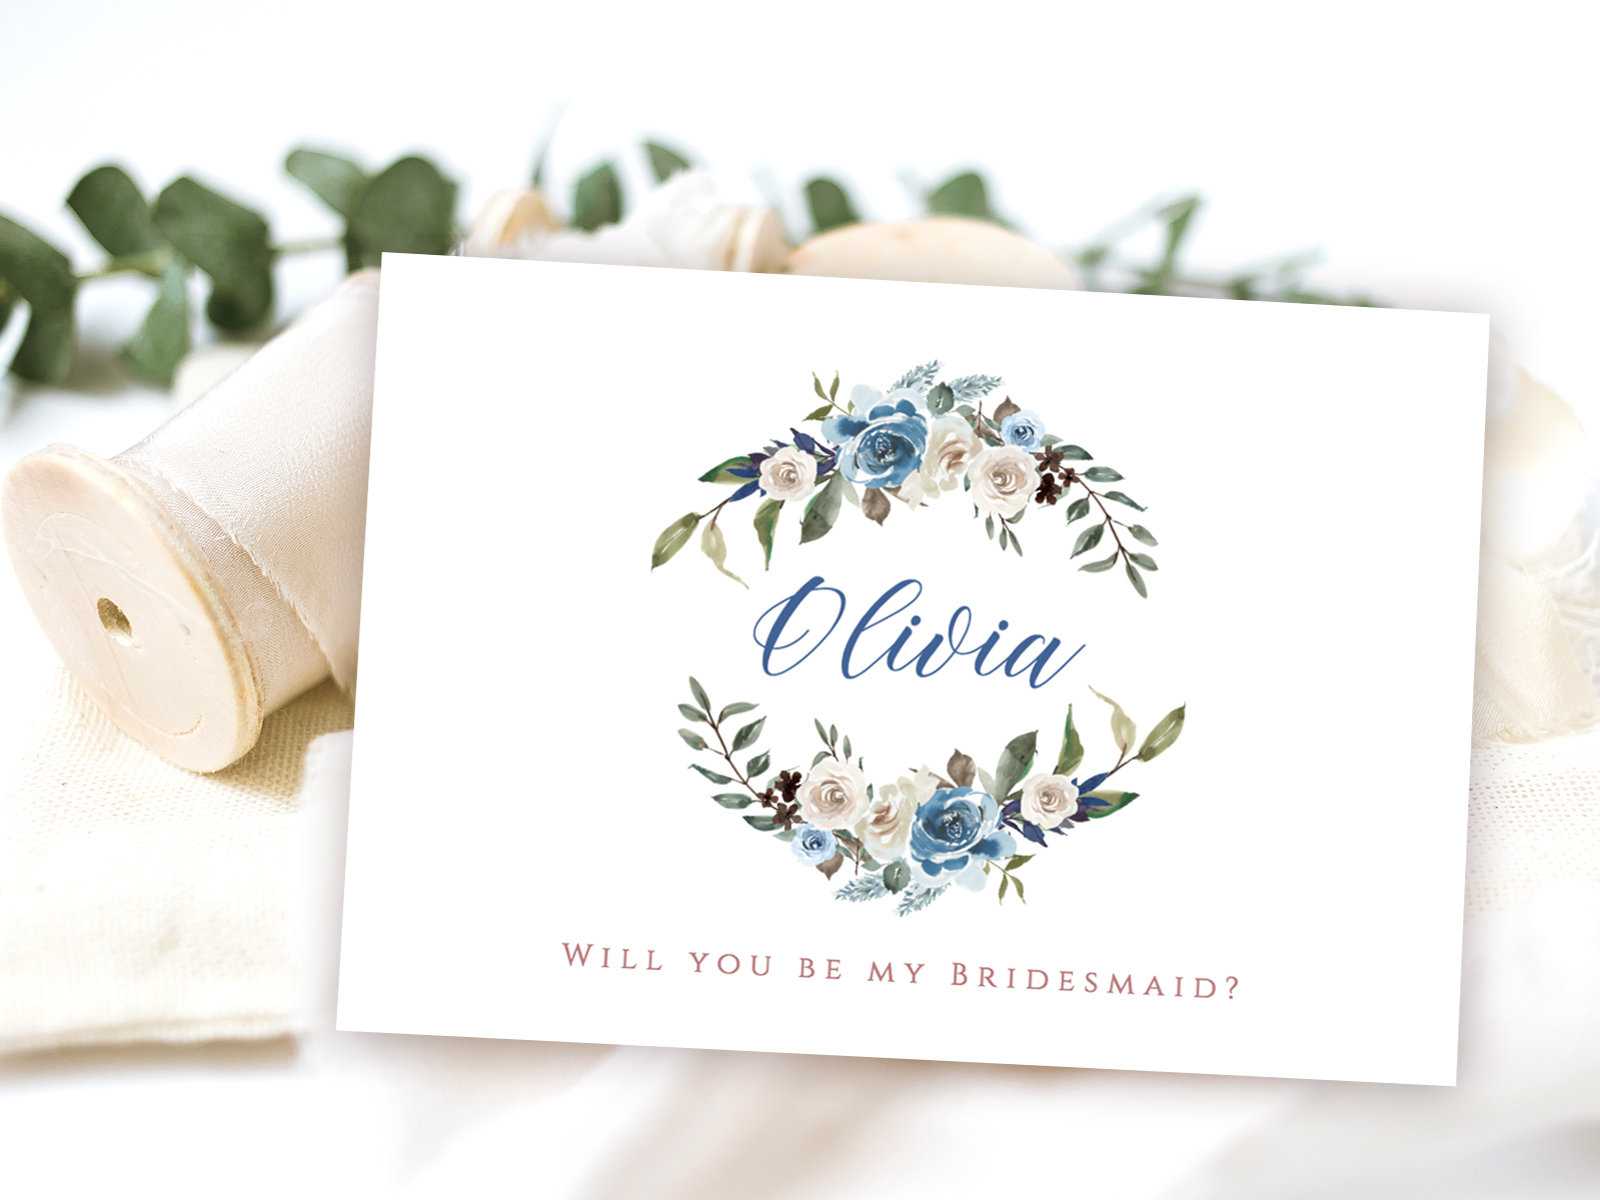 Will You Be My Bridesmaid Card With Blue And Blush Flowers, Editable  Template In Templett, Swr Intended For Will You Be My Bridesmaid Card Template